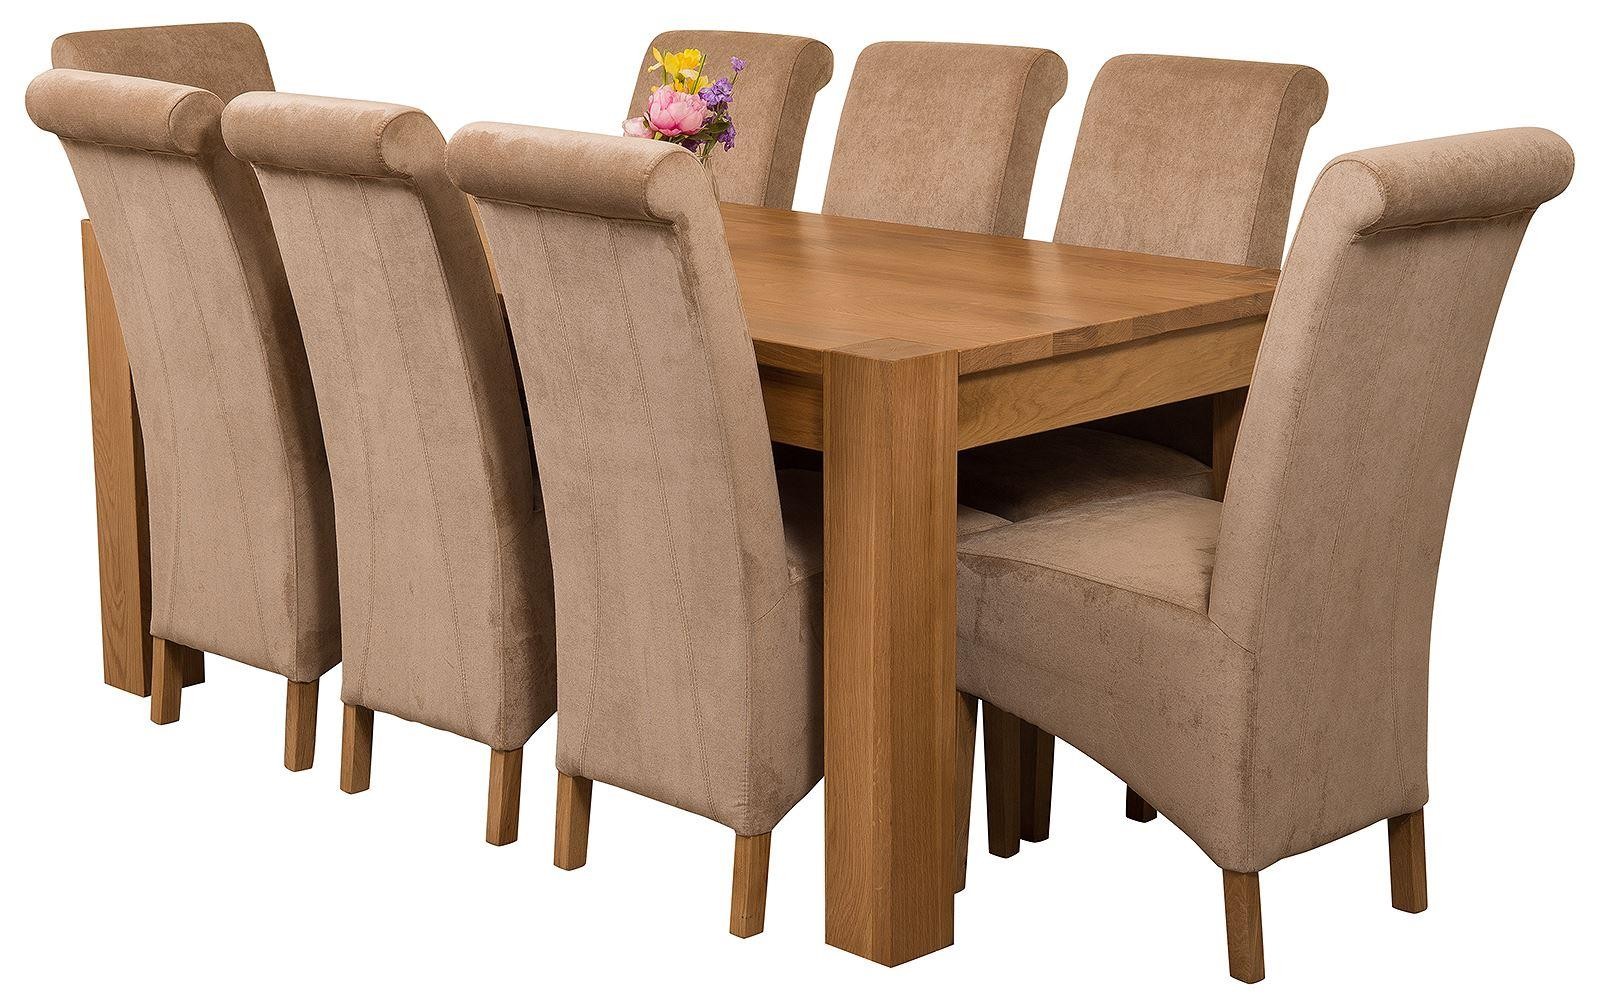 Kuba Solid Oak 180cm Dining Table with 8 Montana Dining Chairs [Beige Fabric]